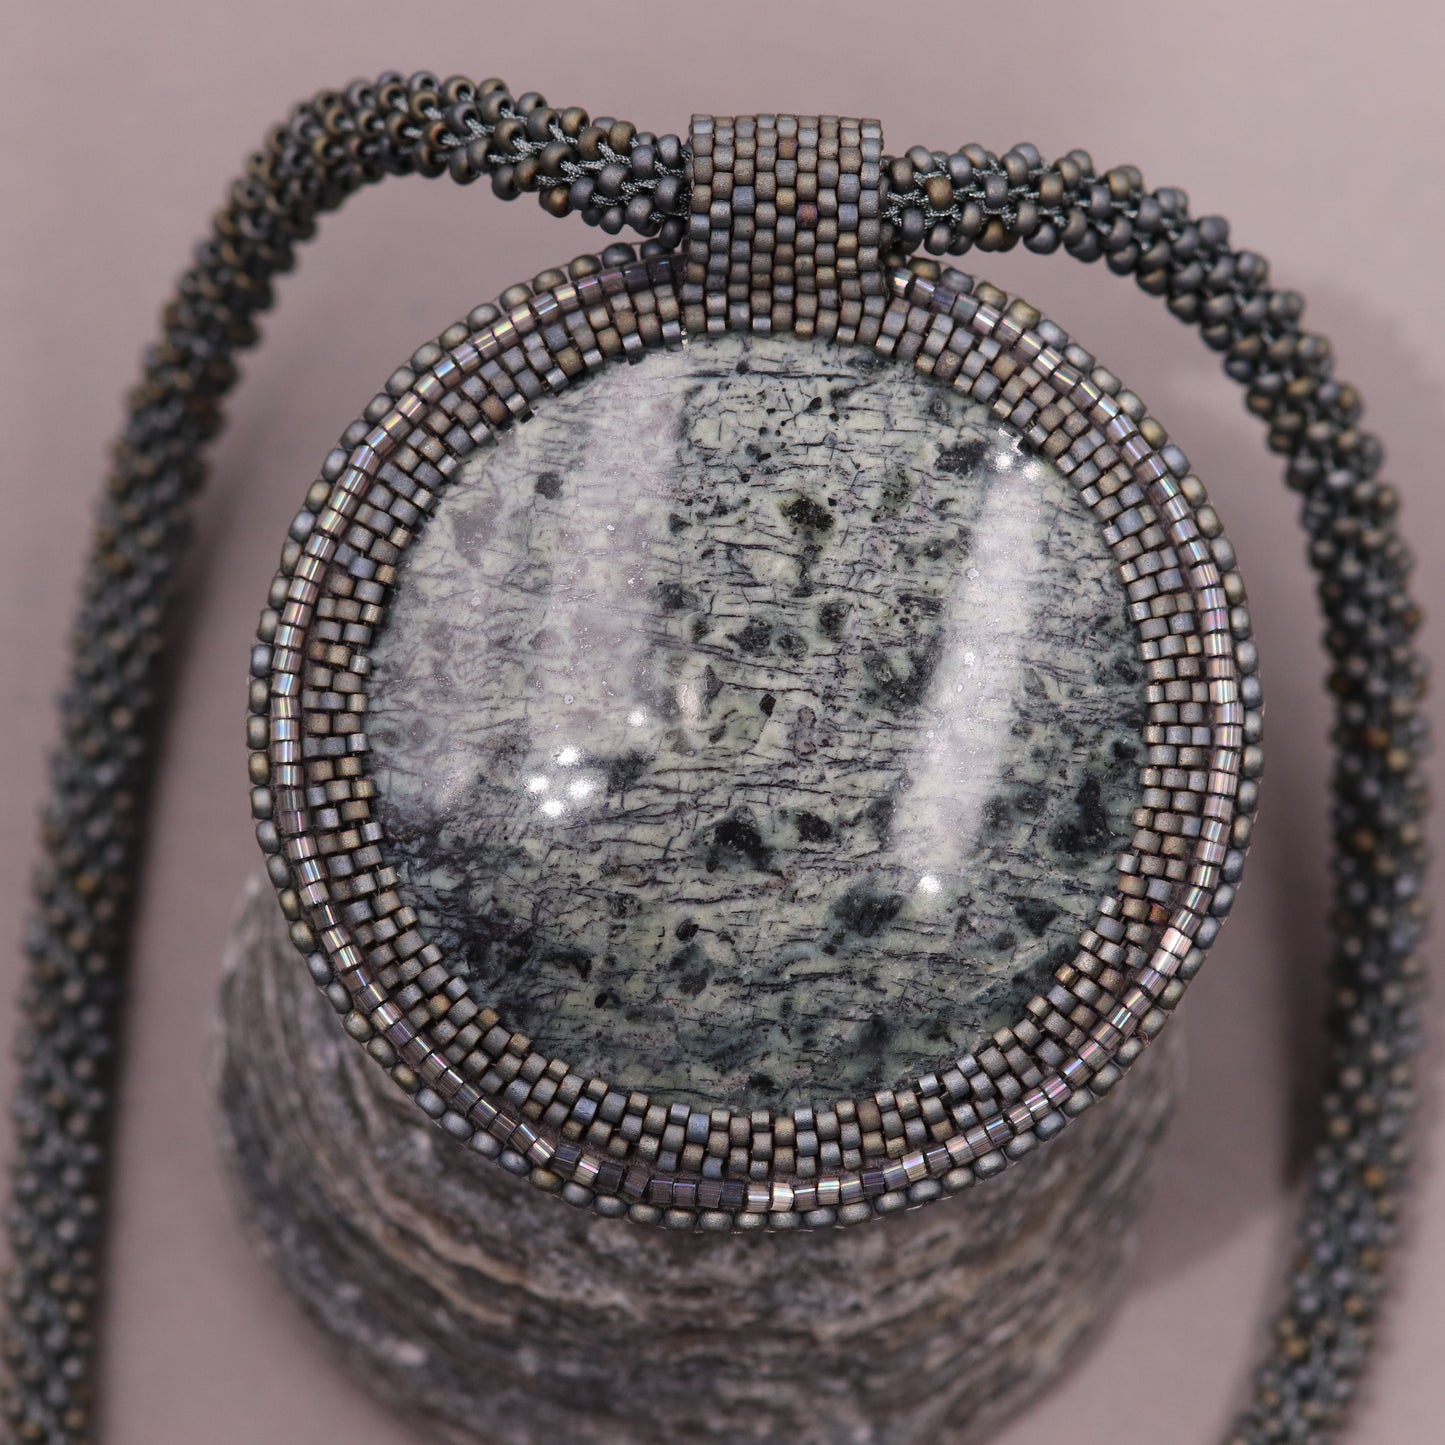 Necklace with listwaenite